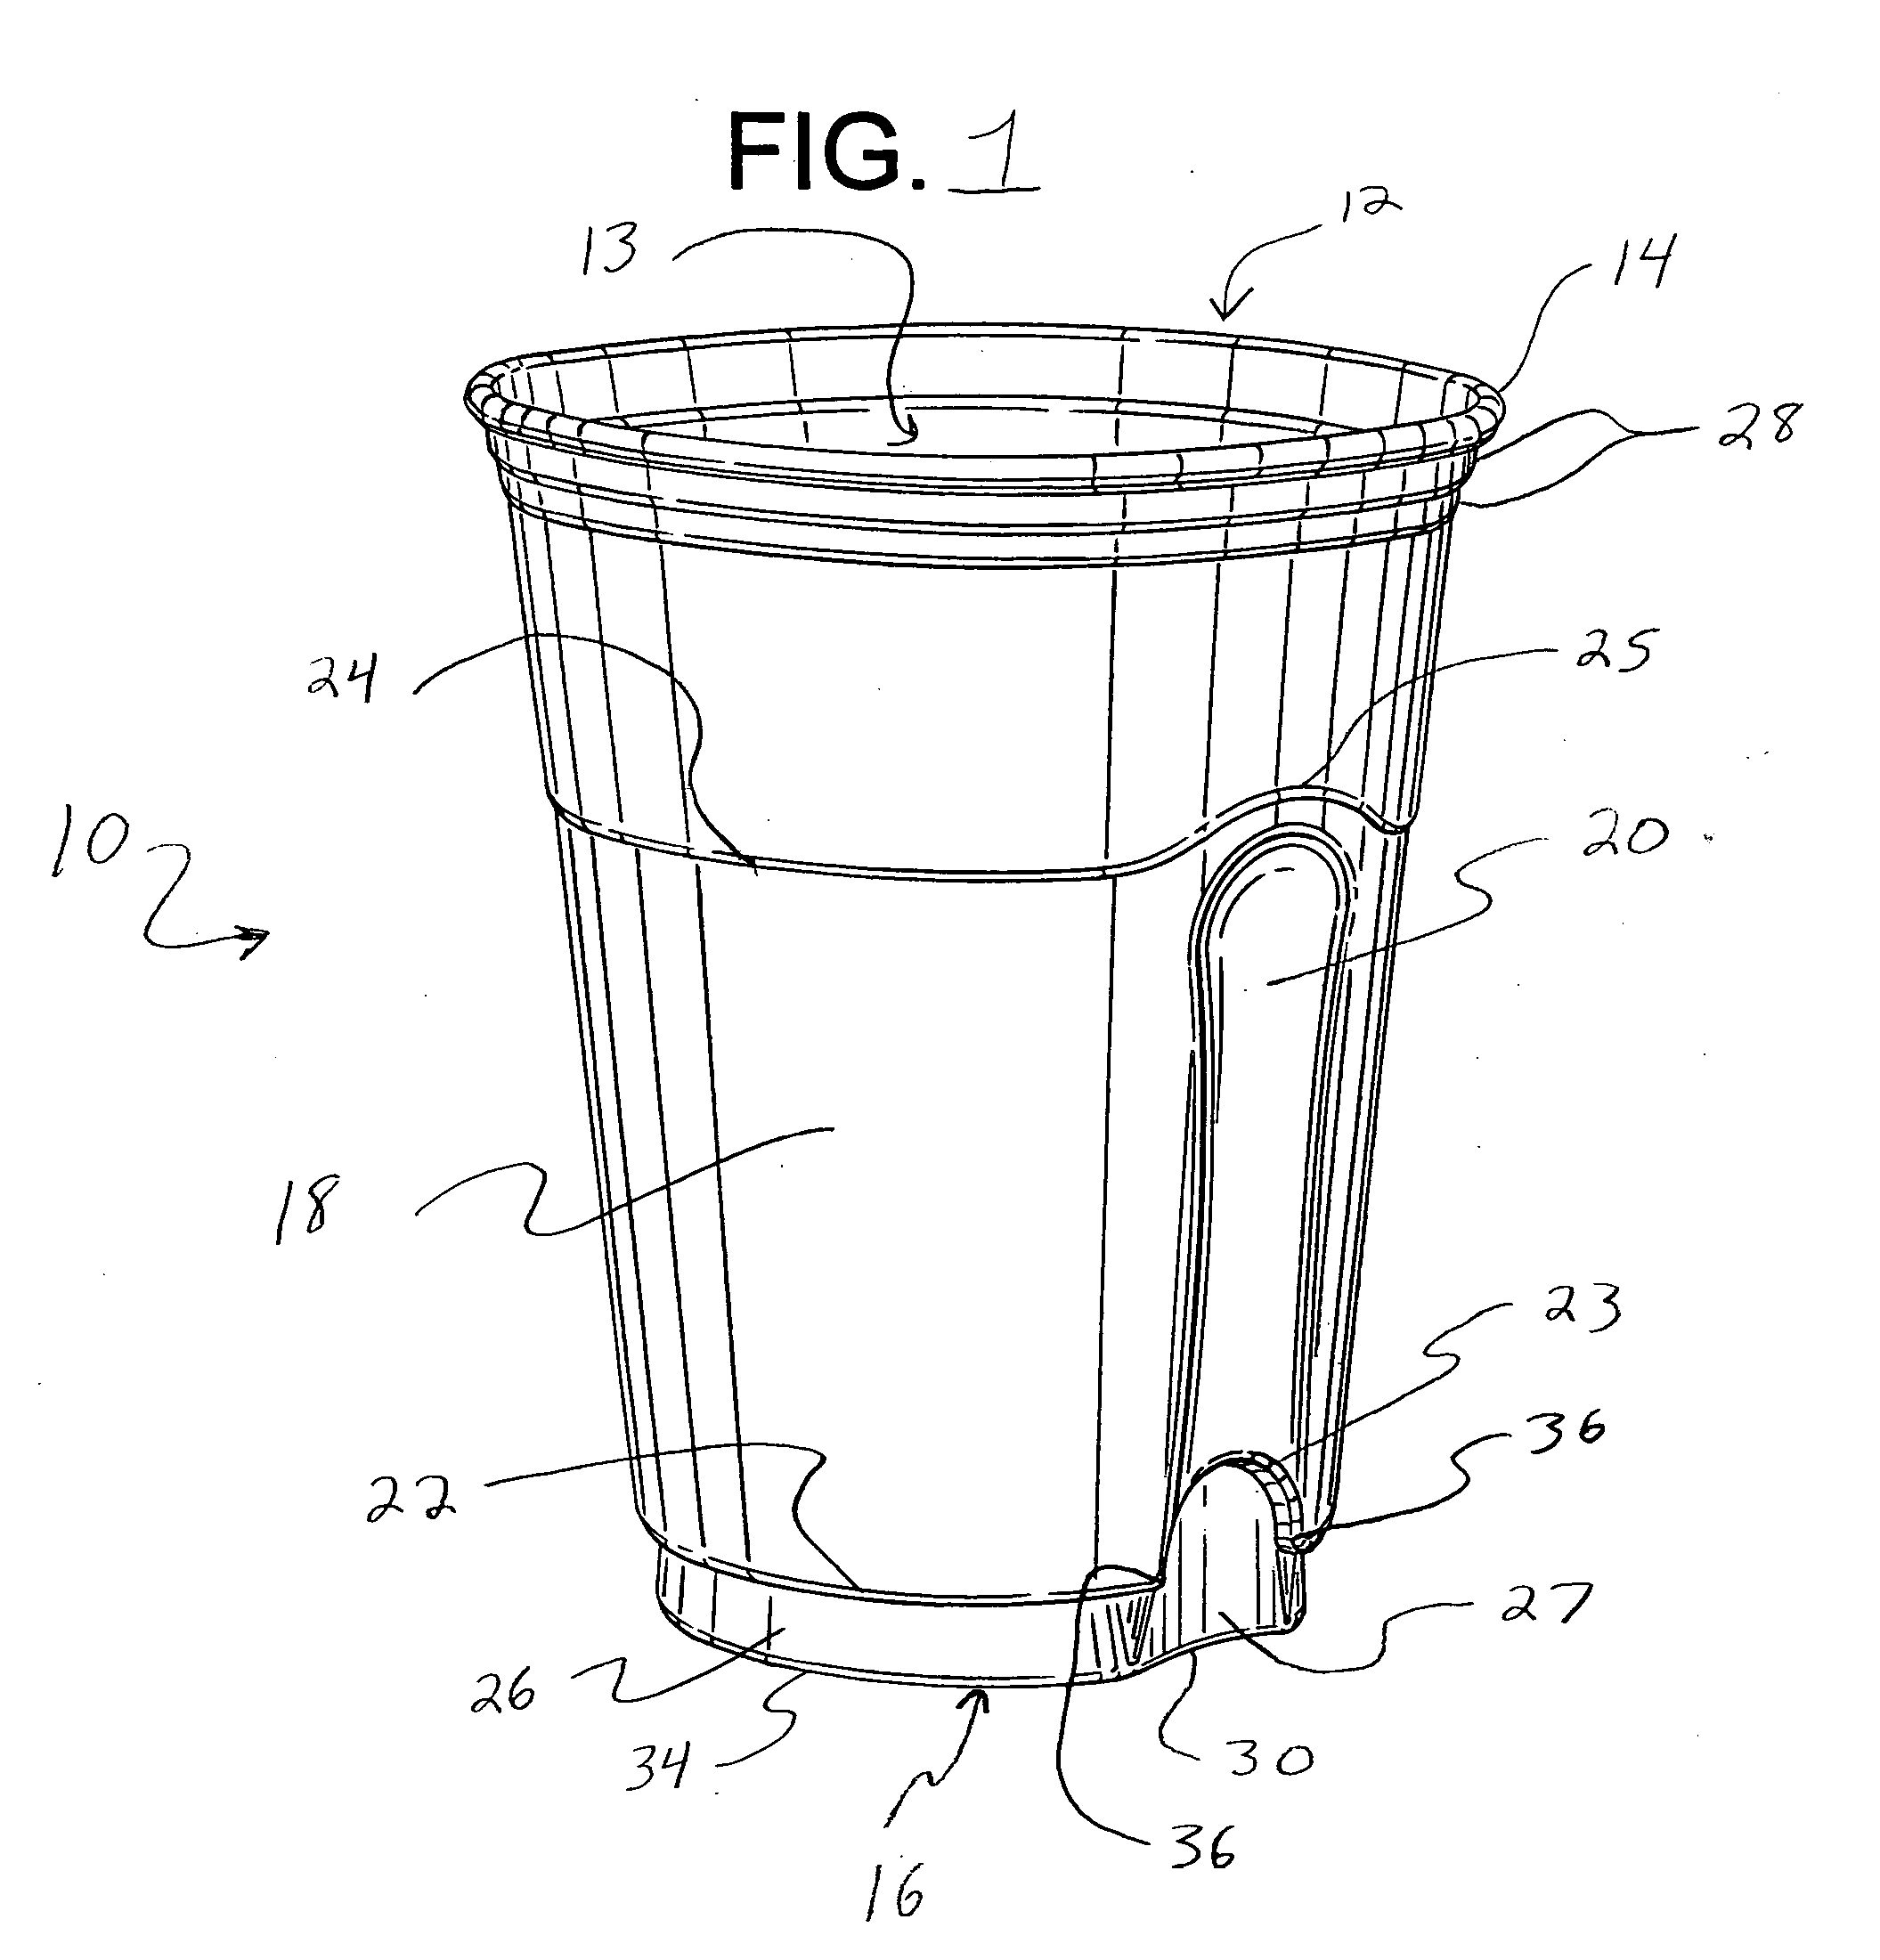 Ergonomic disposable cup having improved structural integrity